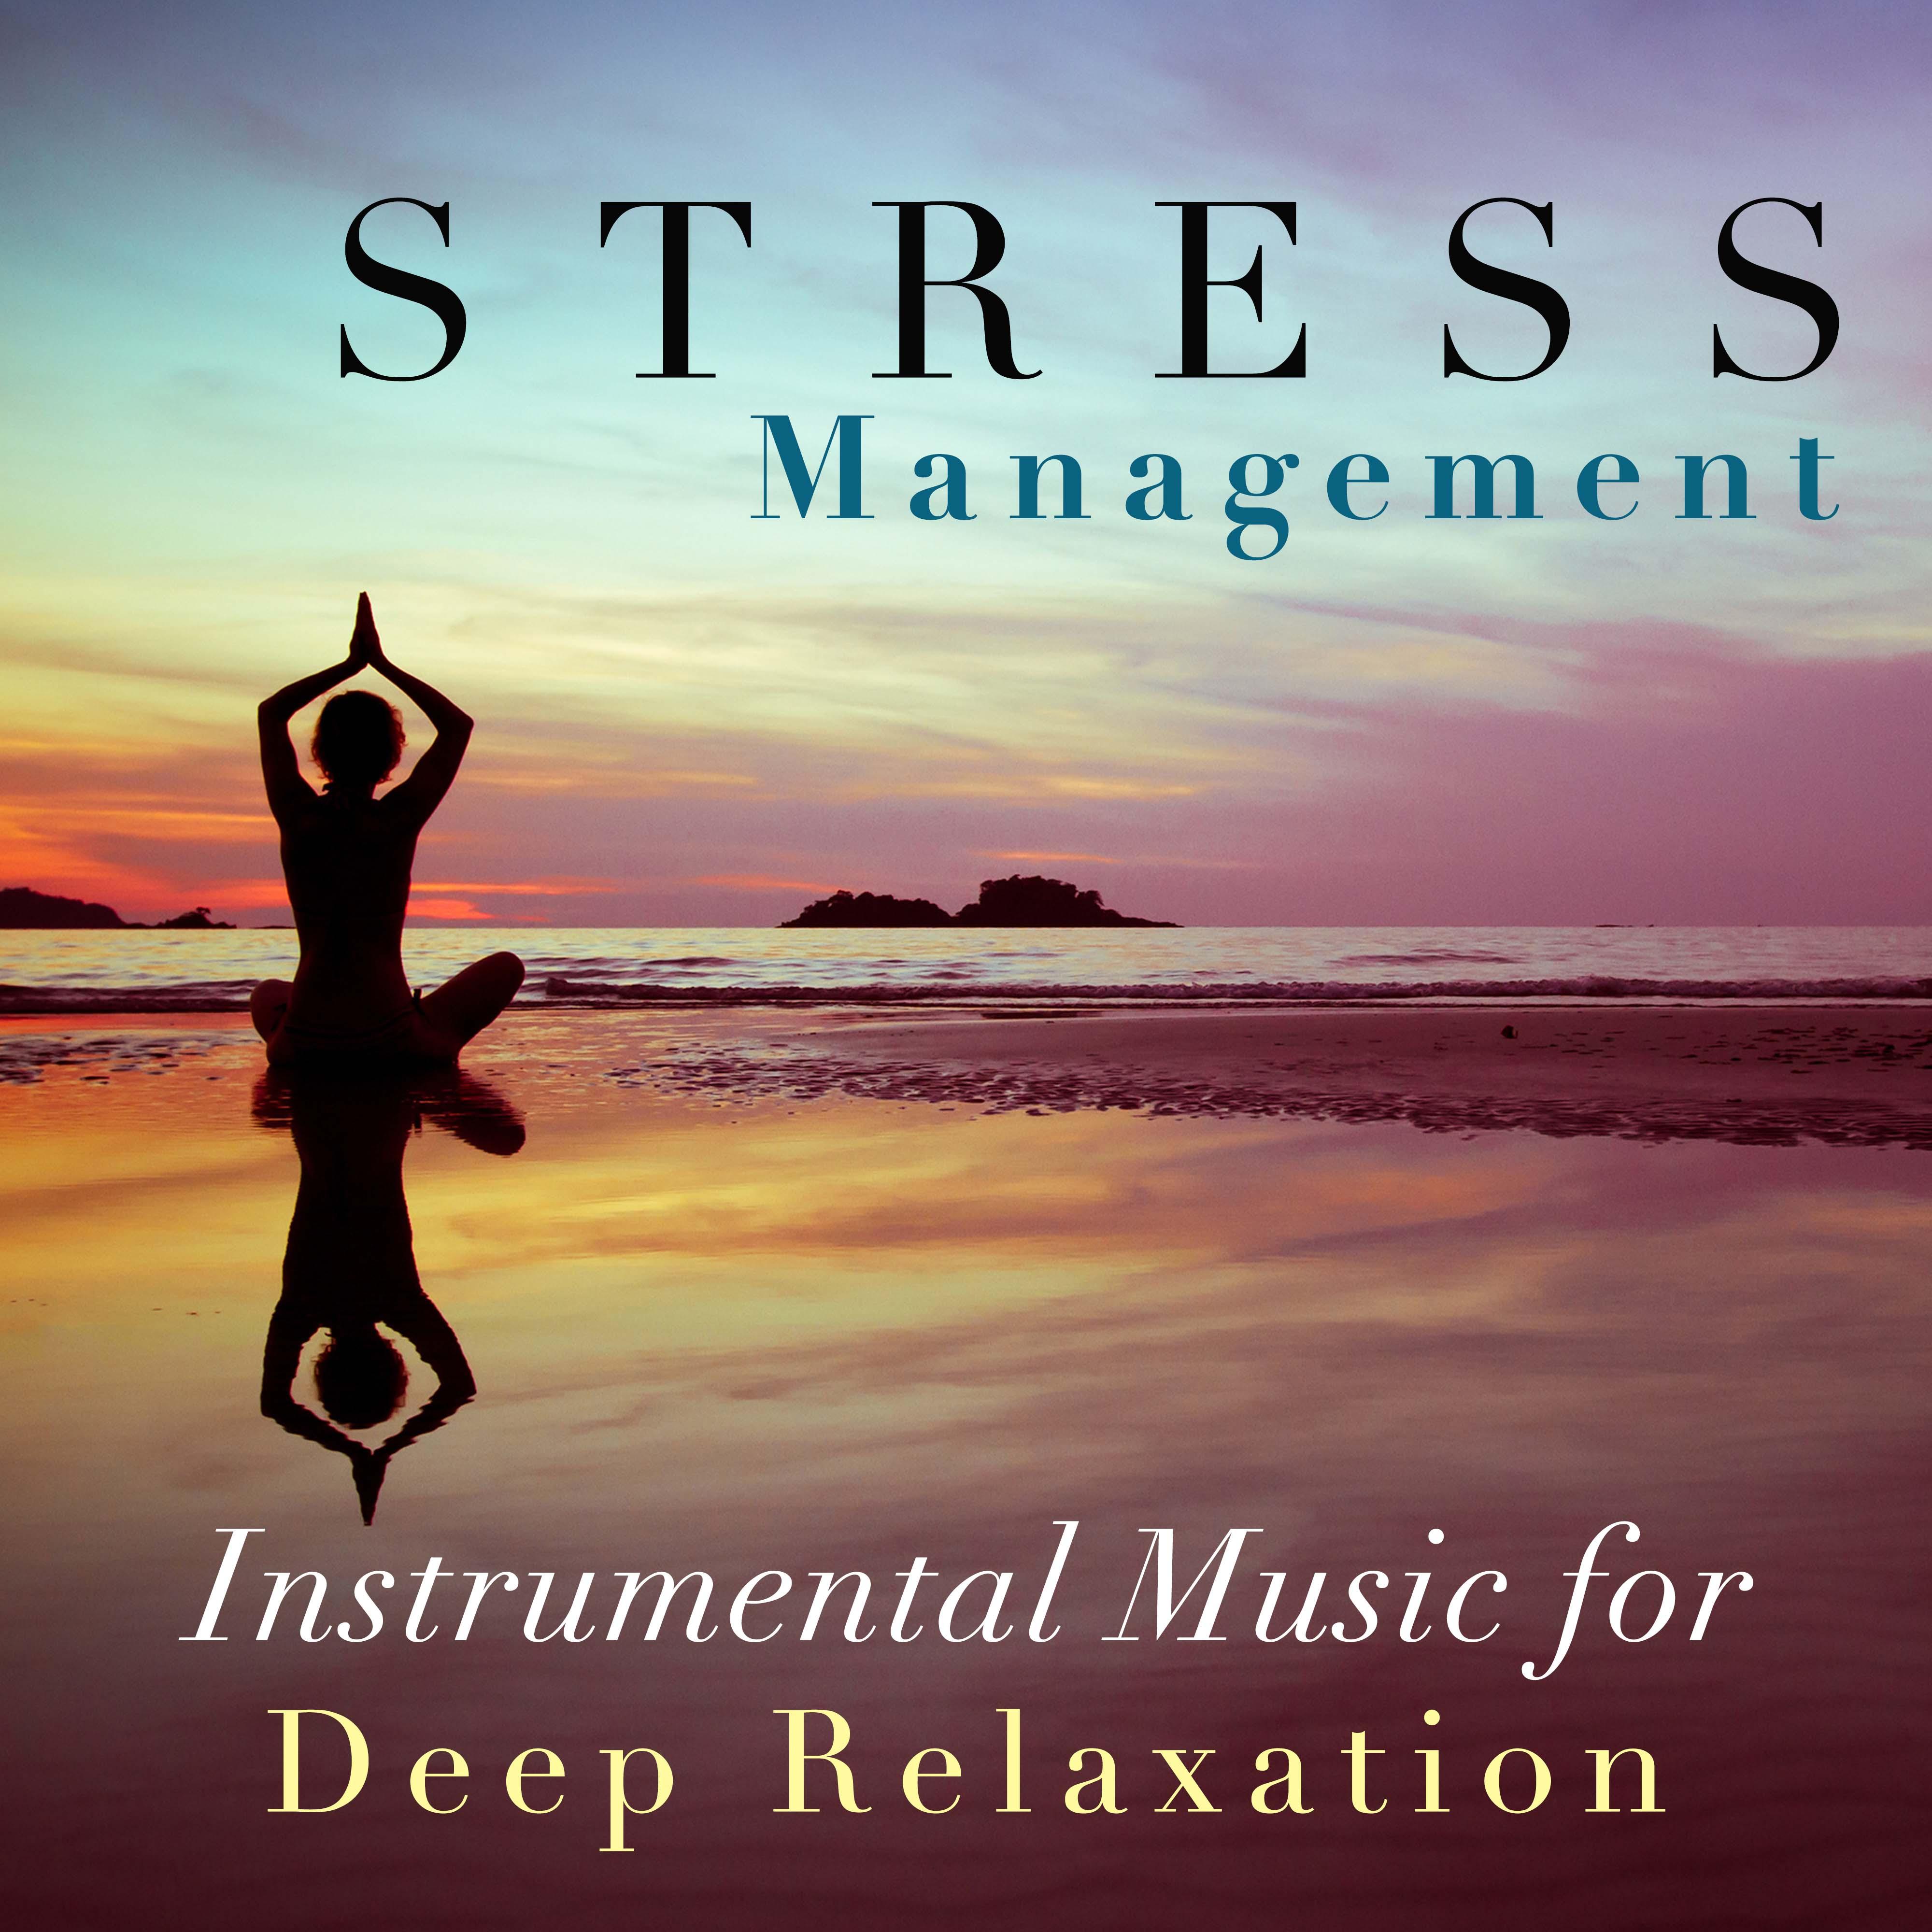 Stress Management - Instrumental Music for Deep Relaxation